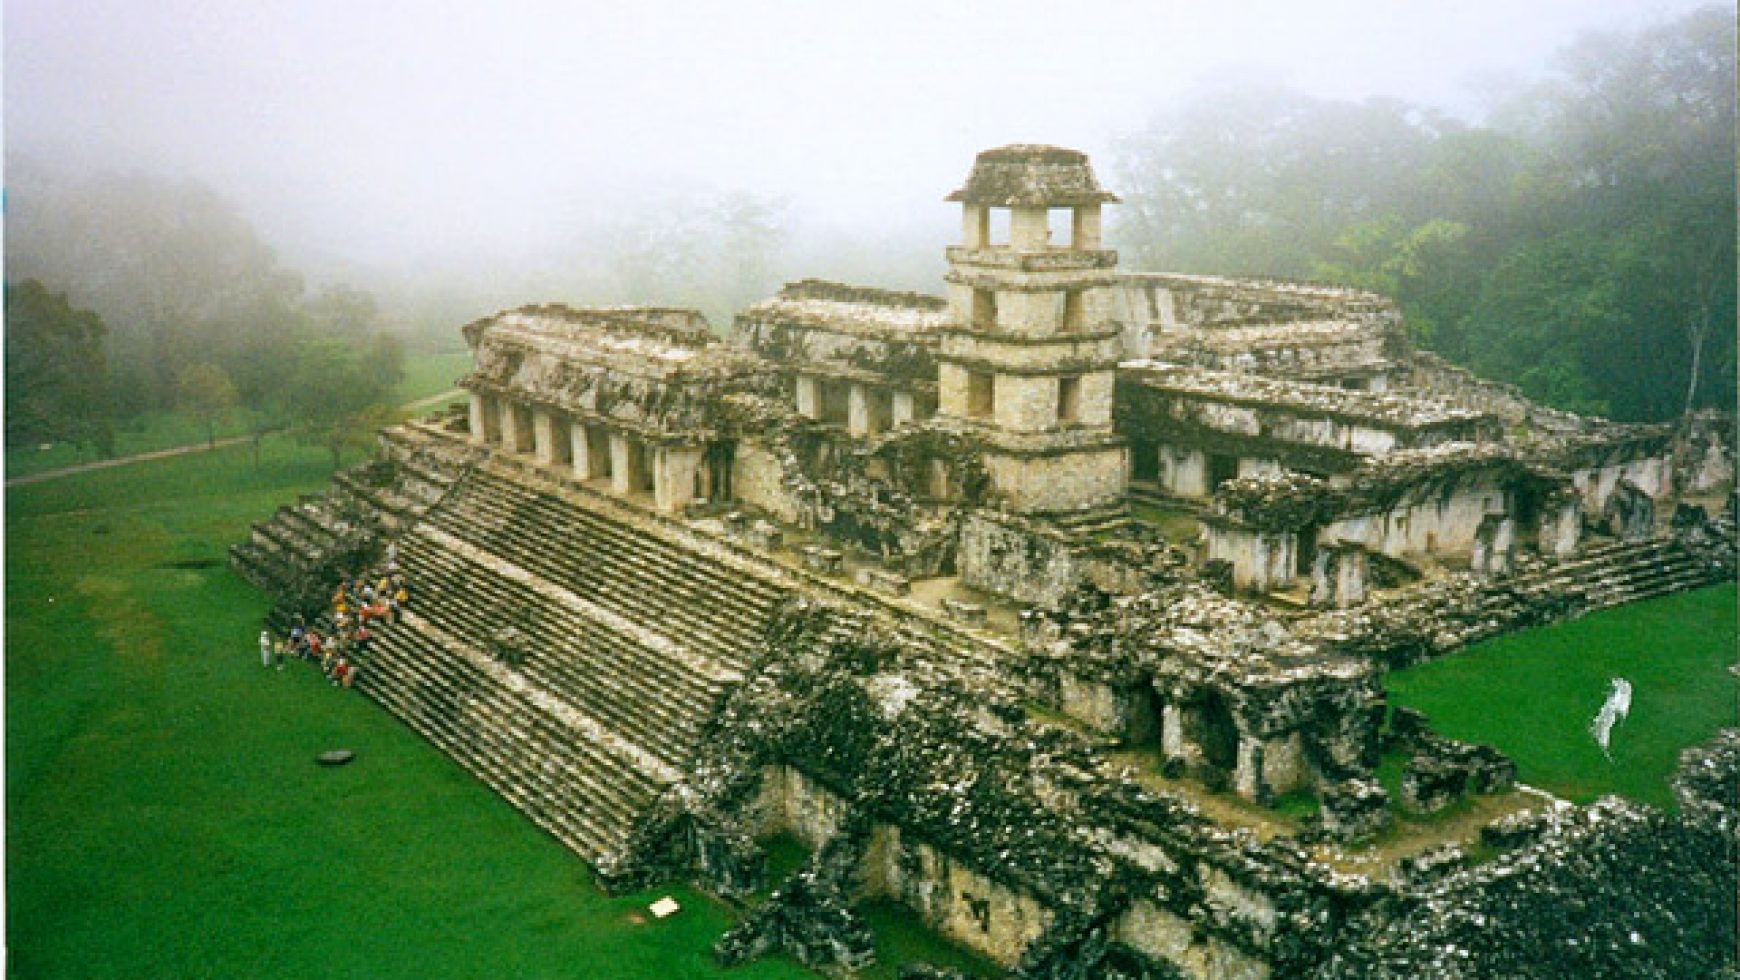 Aardeheling Palenque, Mexico